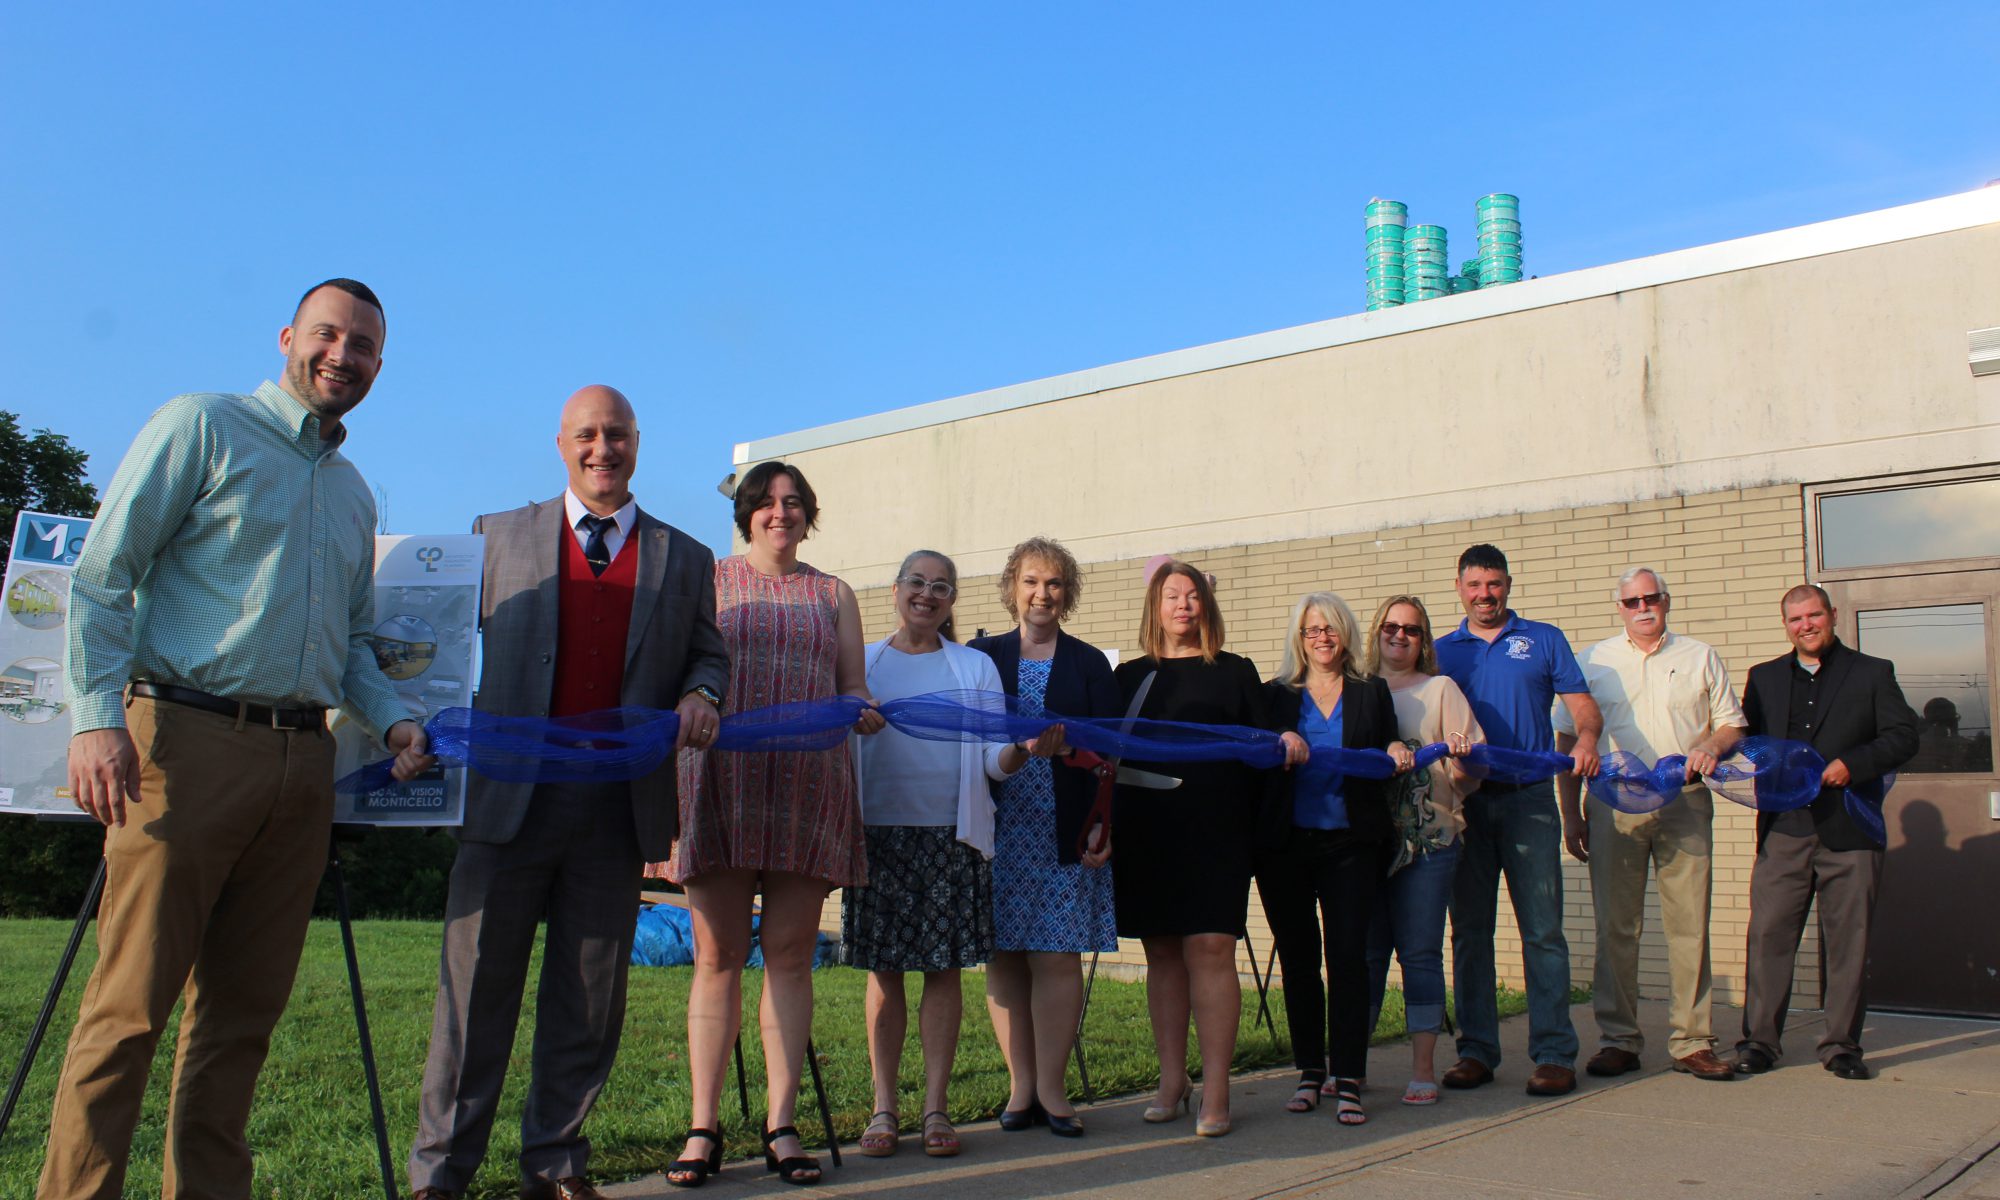 members of the board and representatives from the district's architectural firm cut a ribbon